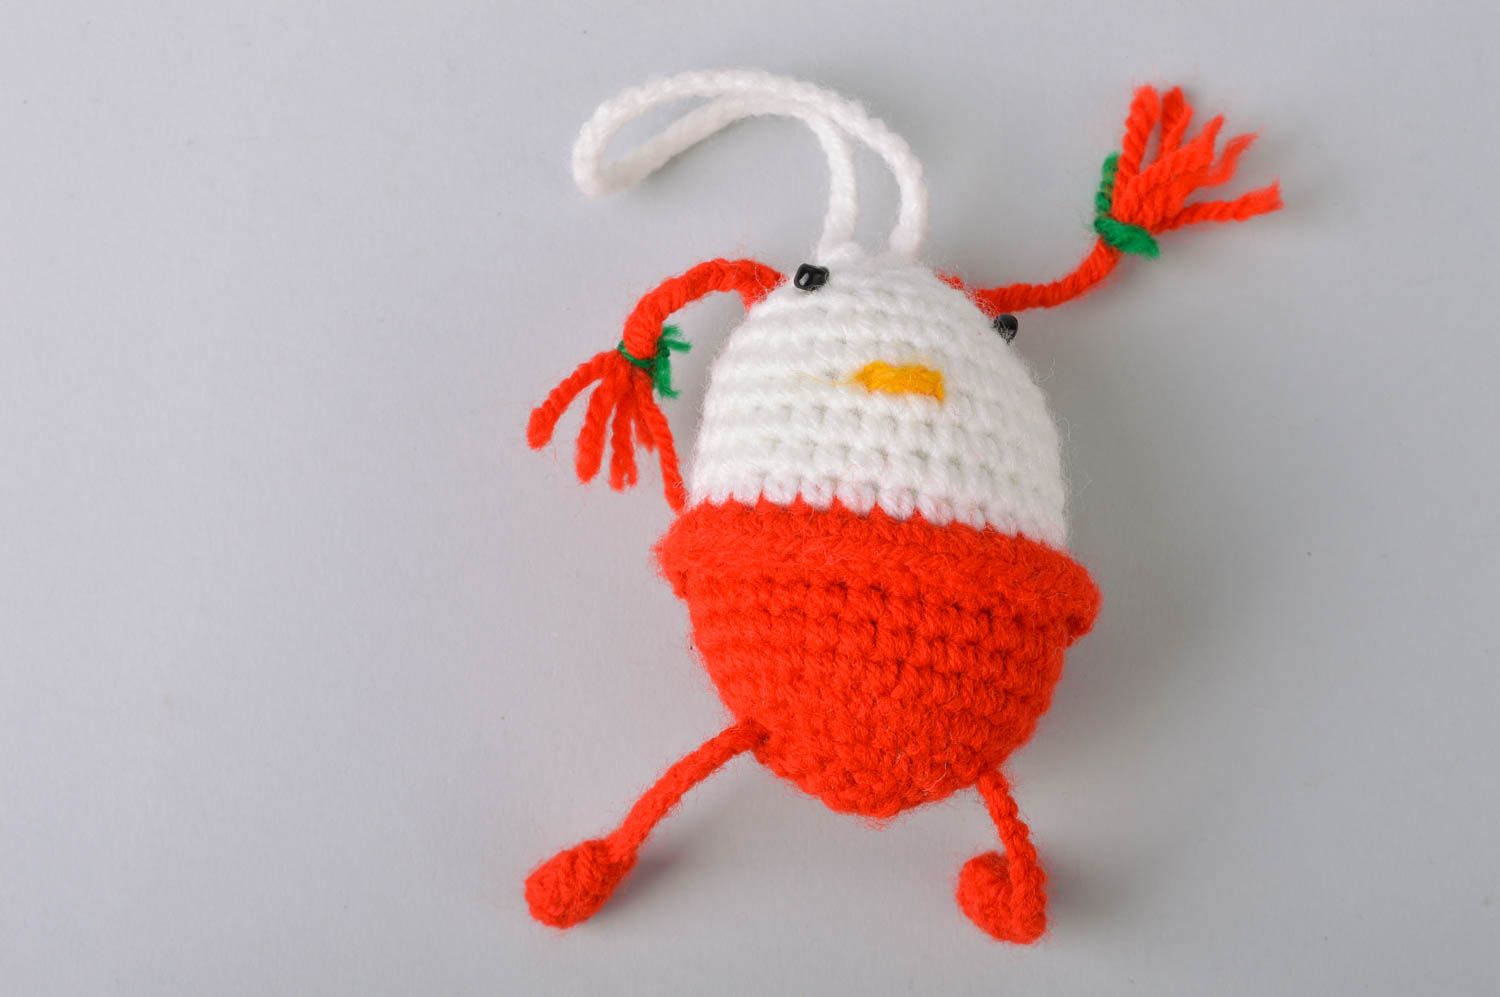 Handmade decorative small crocheted soft toy wall hanging white and red egg photo 2